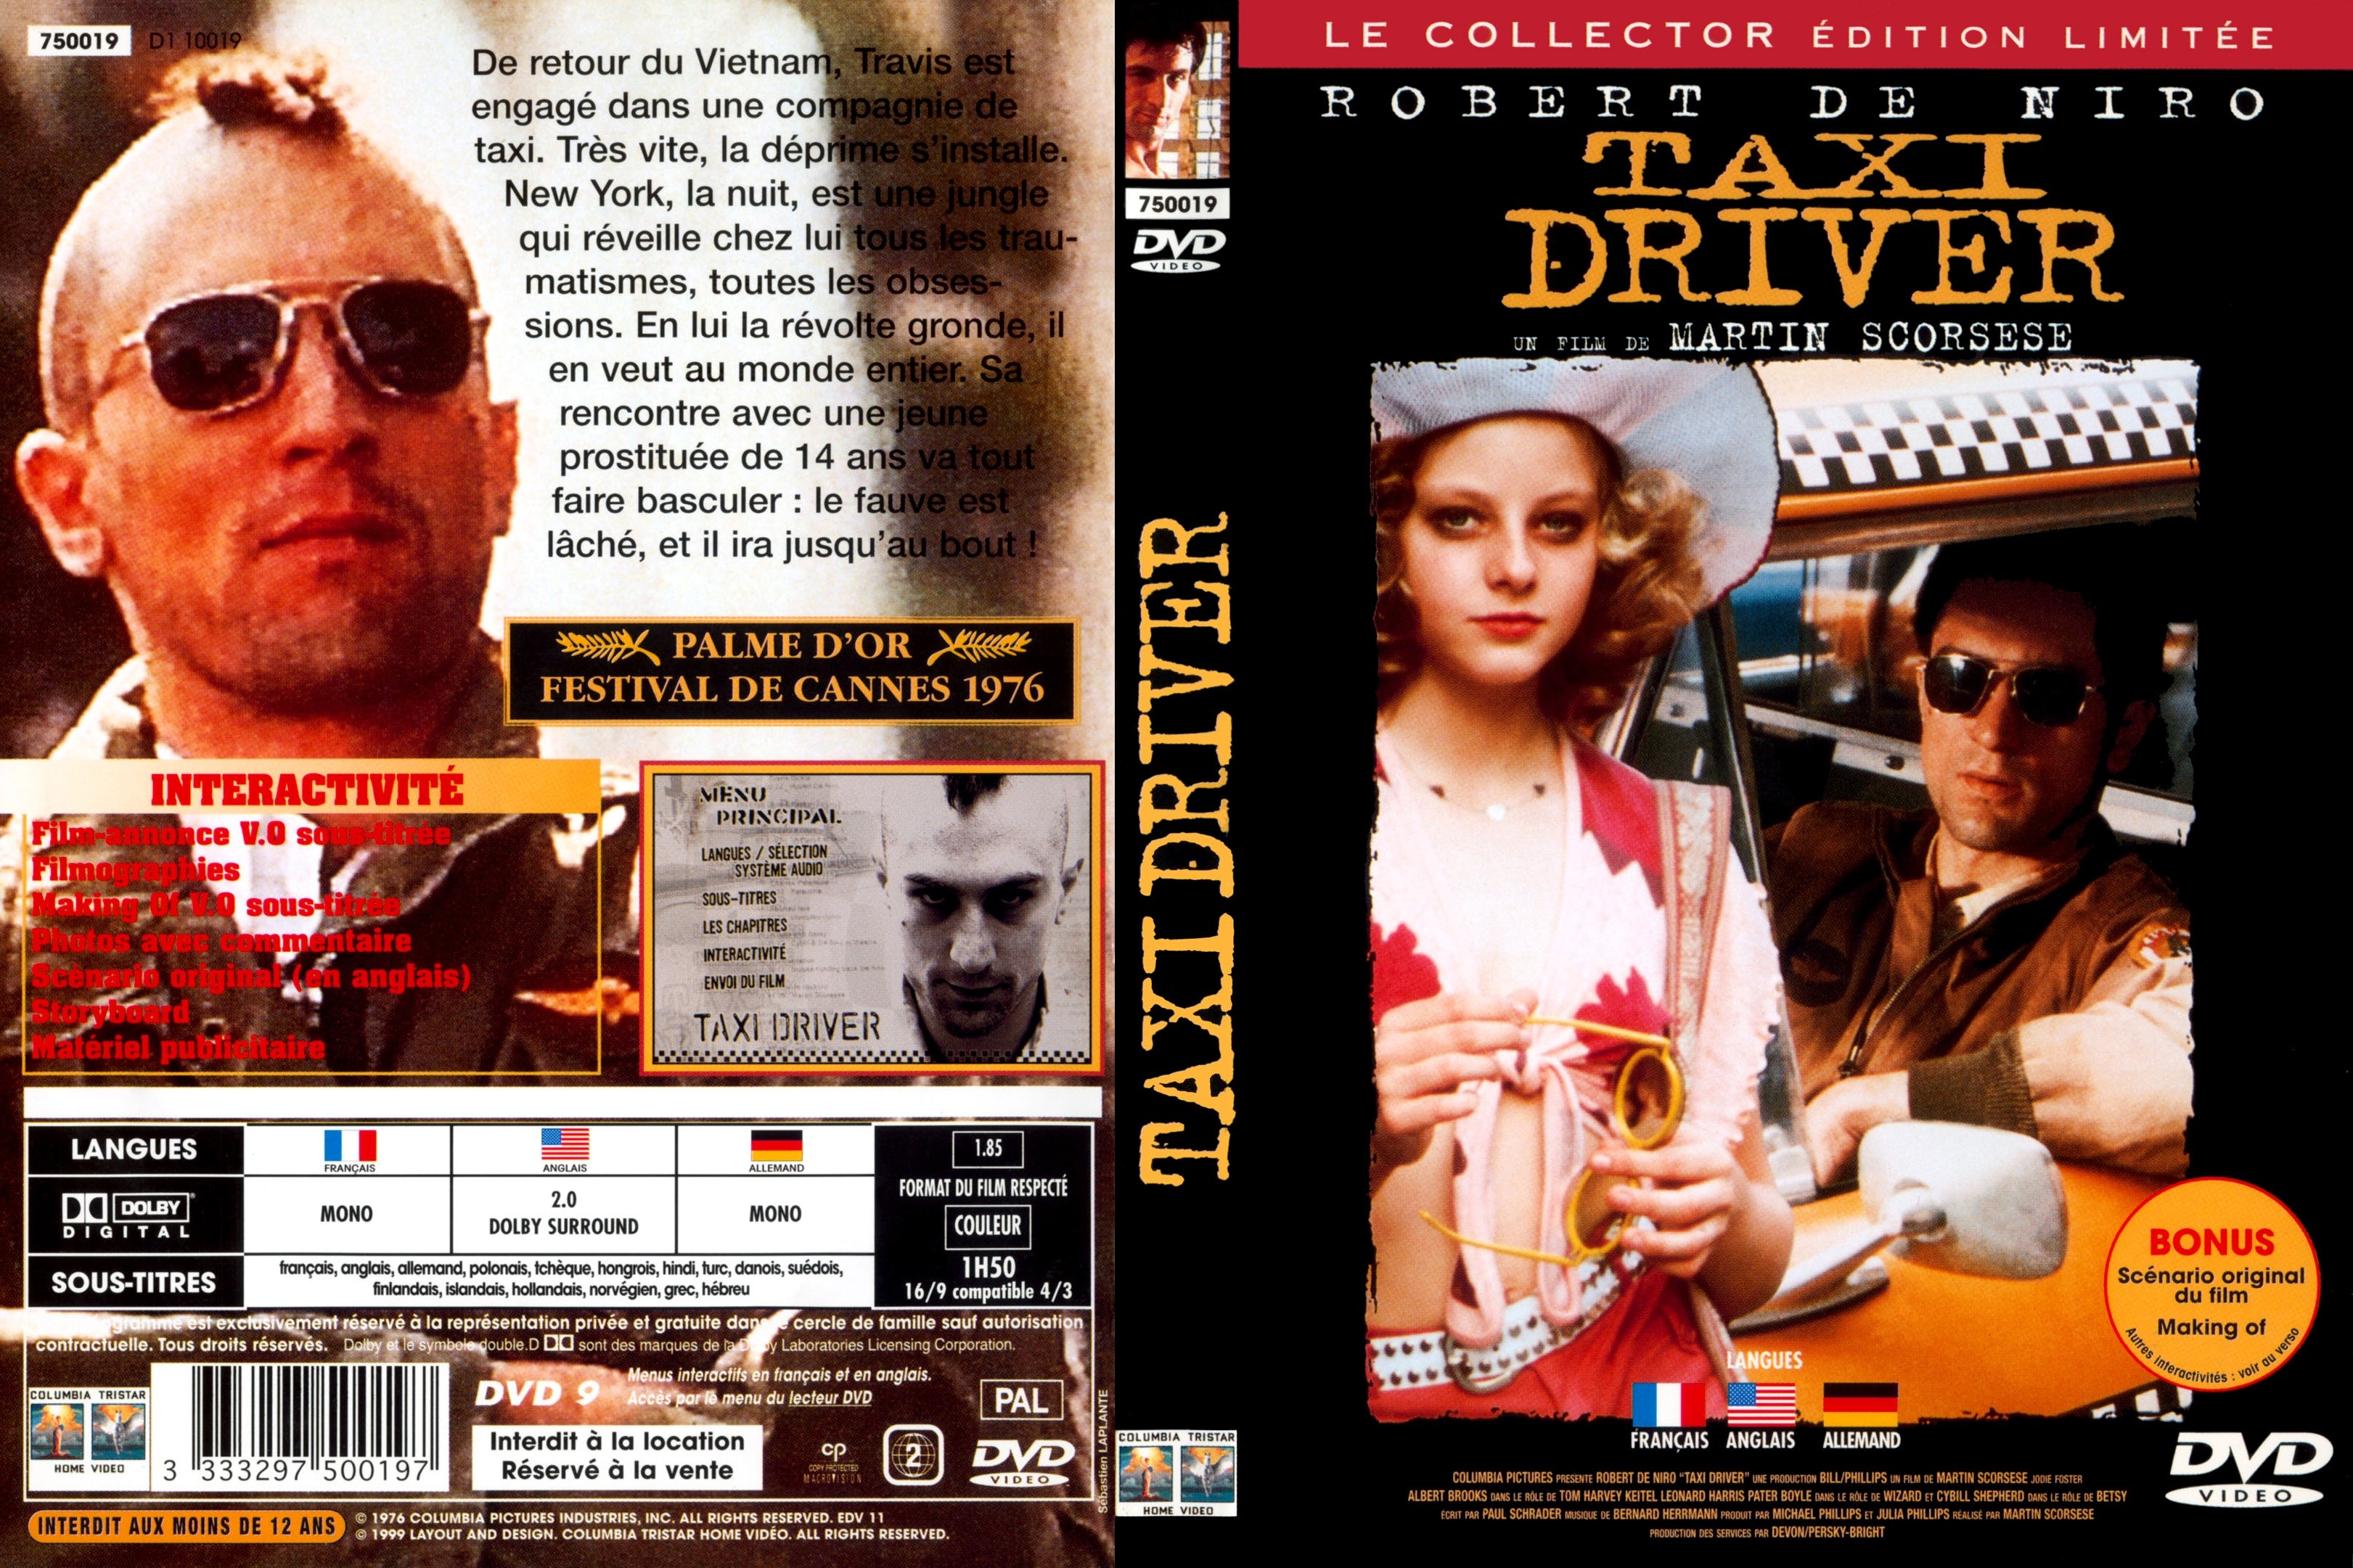 Jaquette DVD Taxi driver